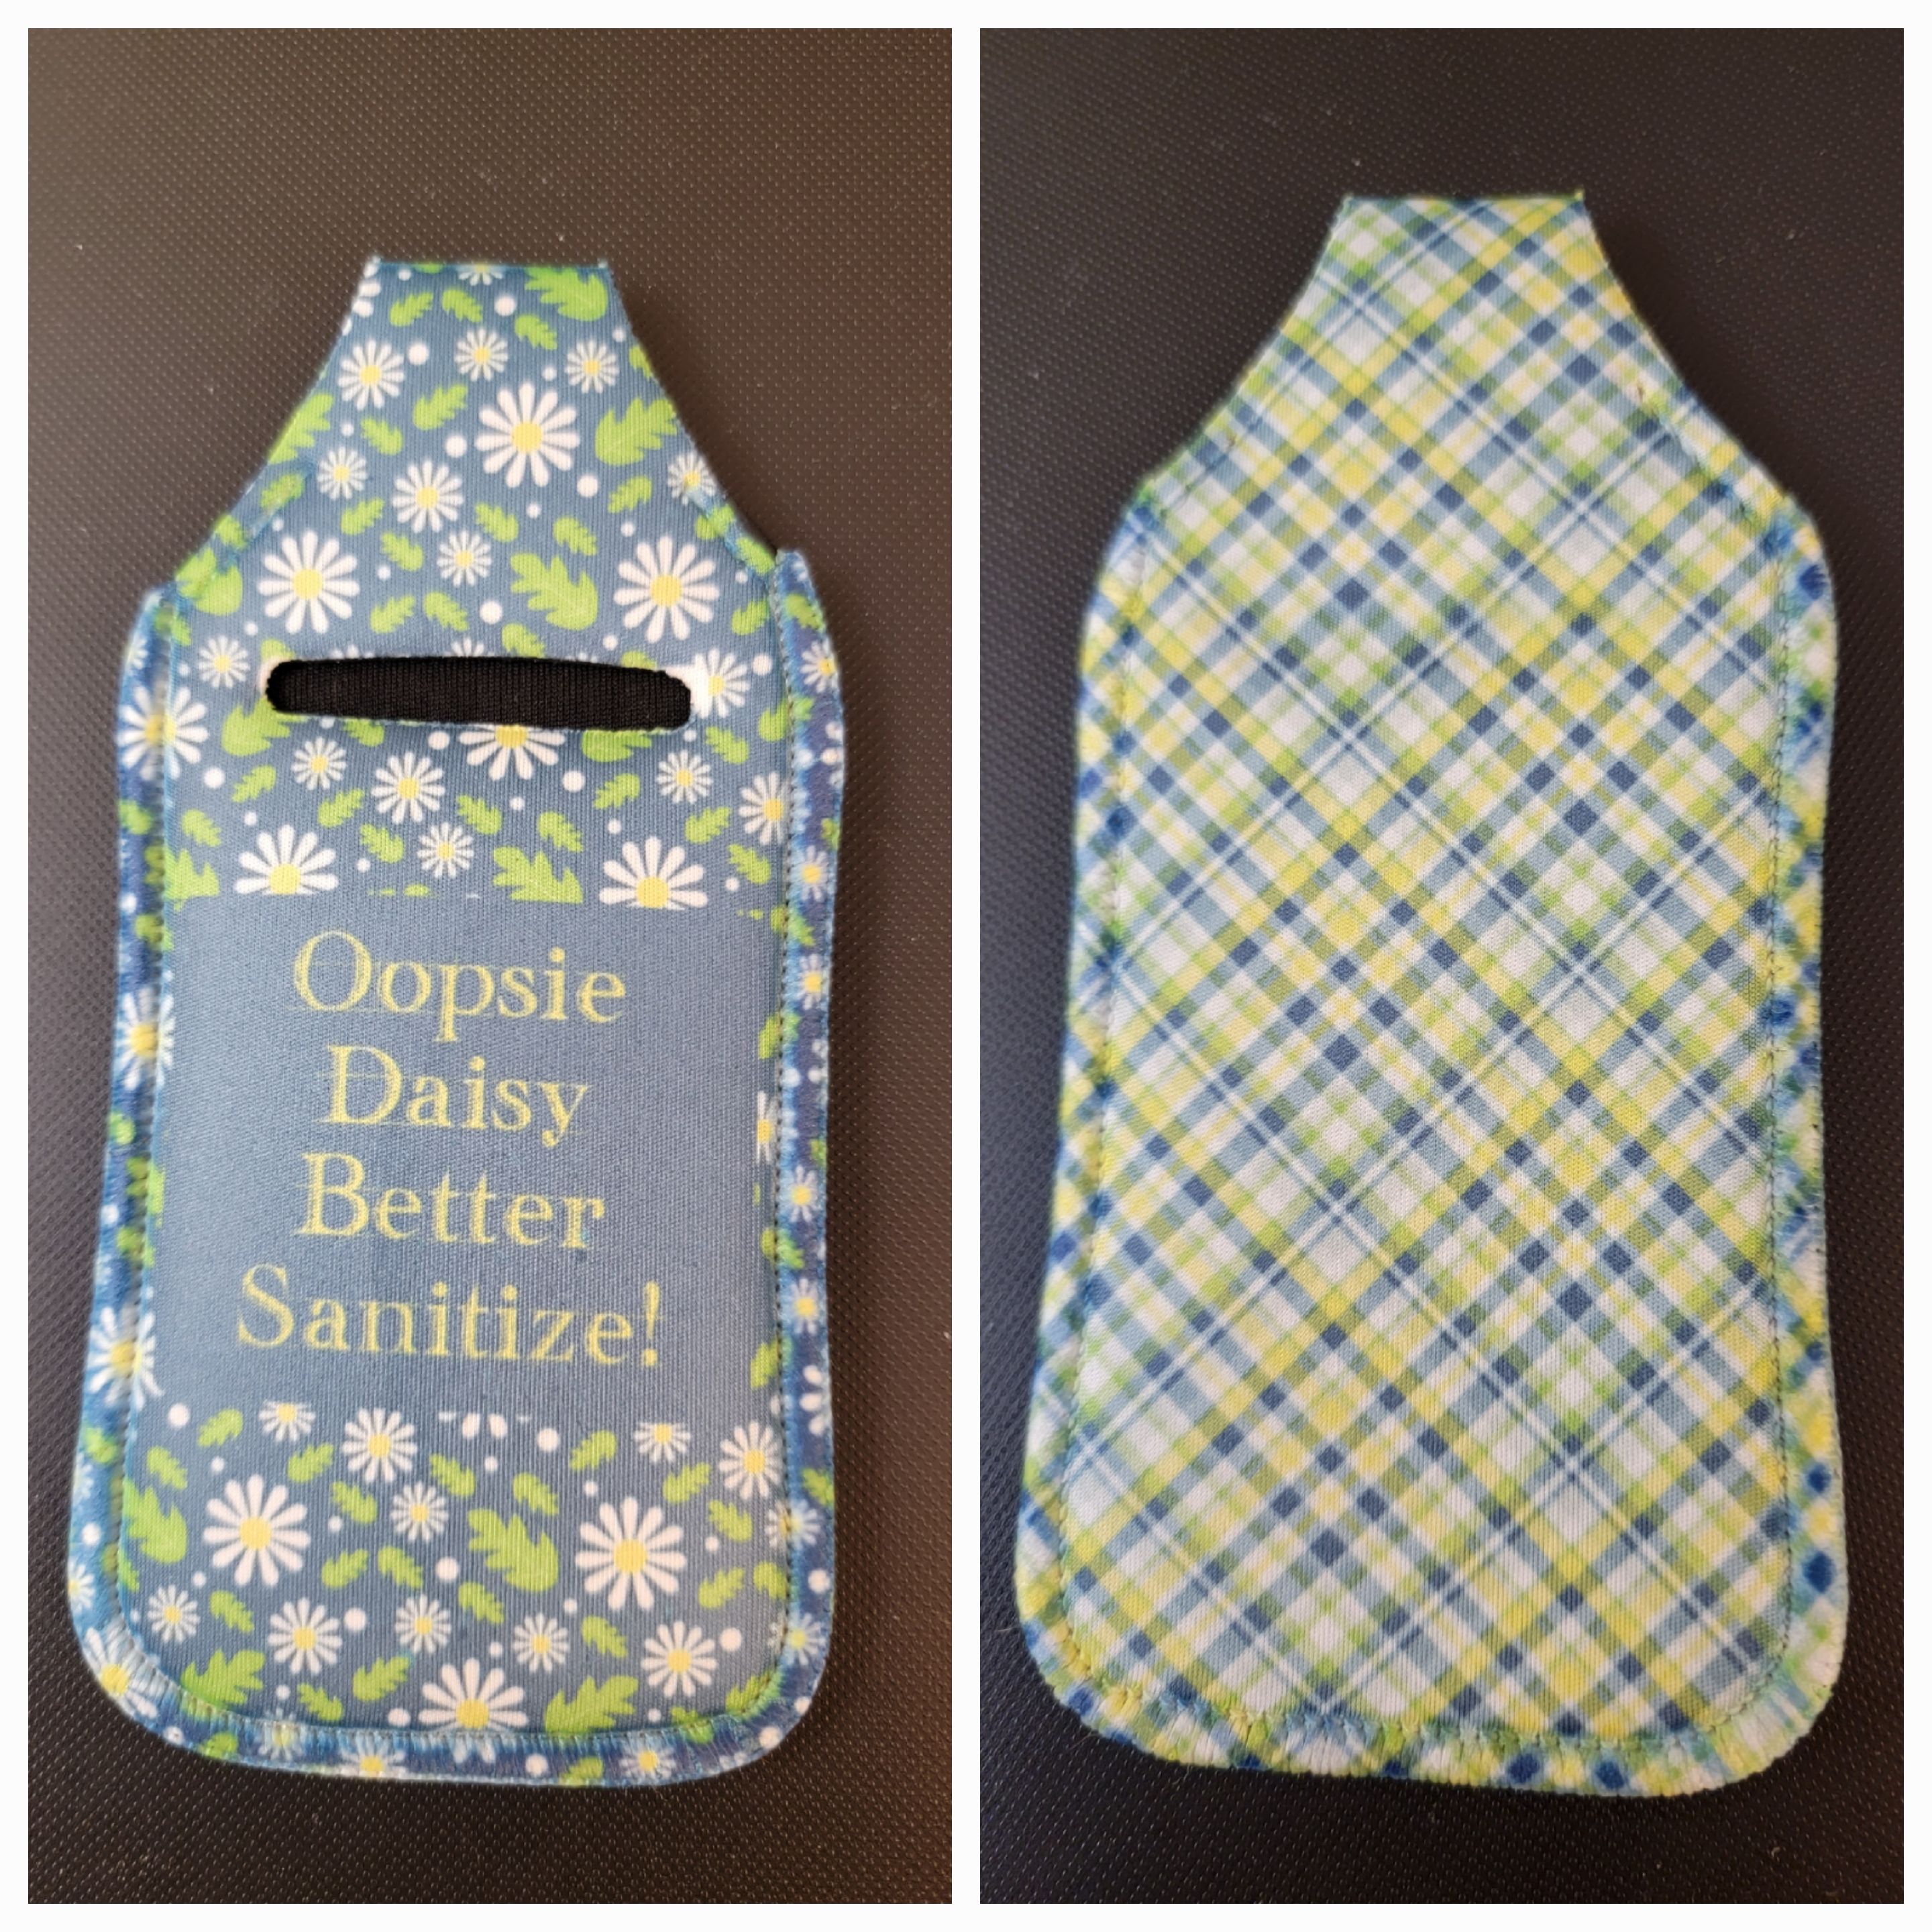 Oopsie Daisy Sanitizer pouch made with sublimation printing